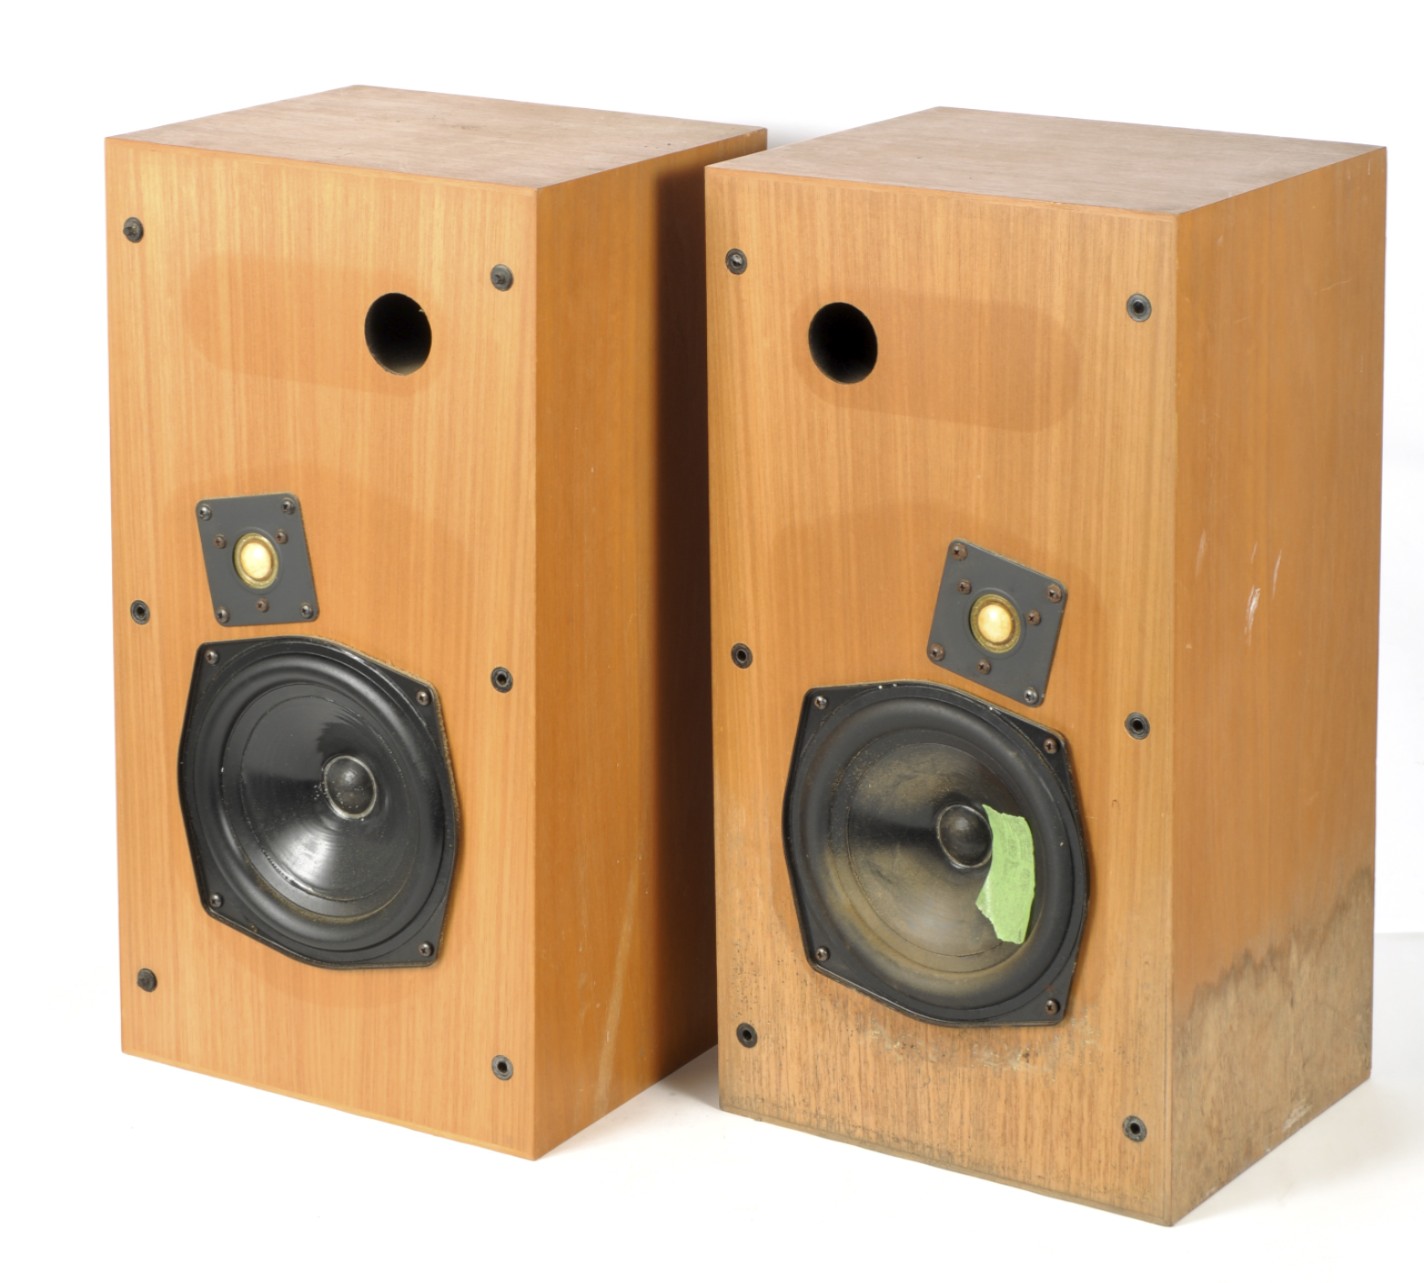 A pair of Monitor Audio Ltd speakers, wooden cased, model no MA4, serial no 3324,